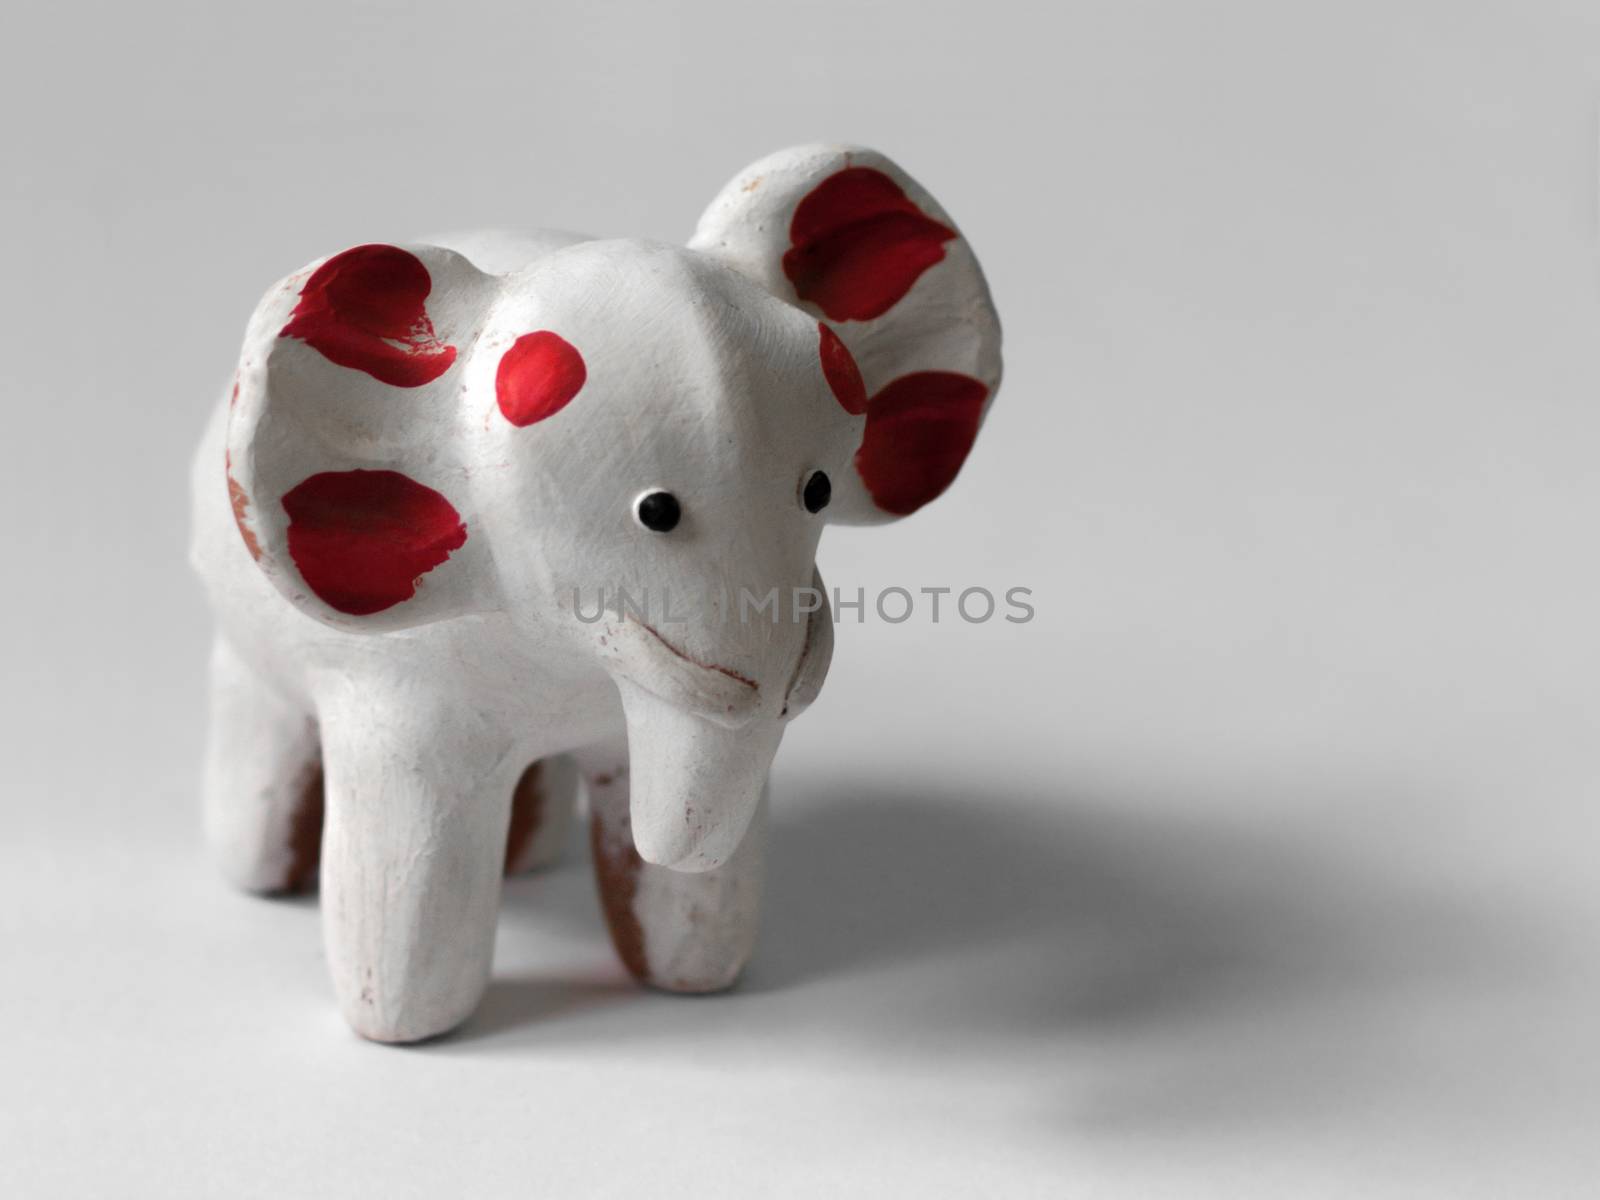 COLOR PHOTO OF WHITE ELEPHANT TOY